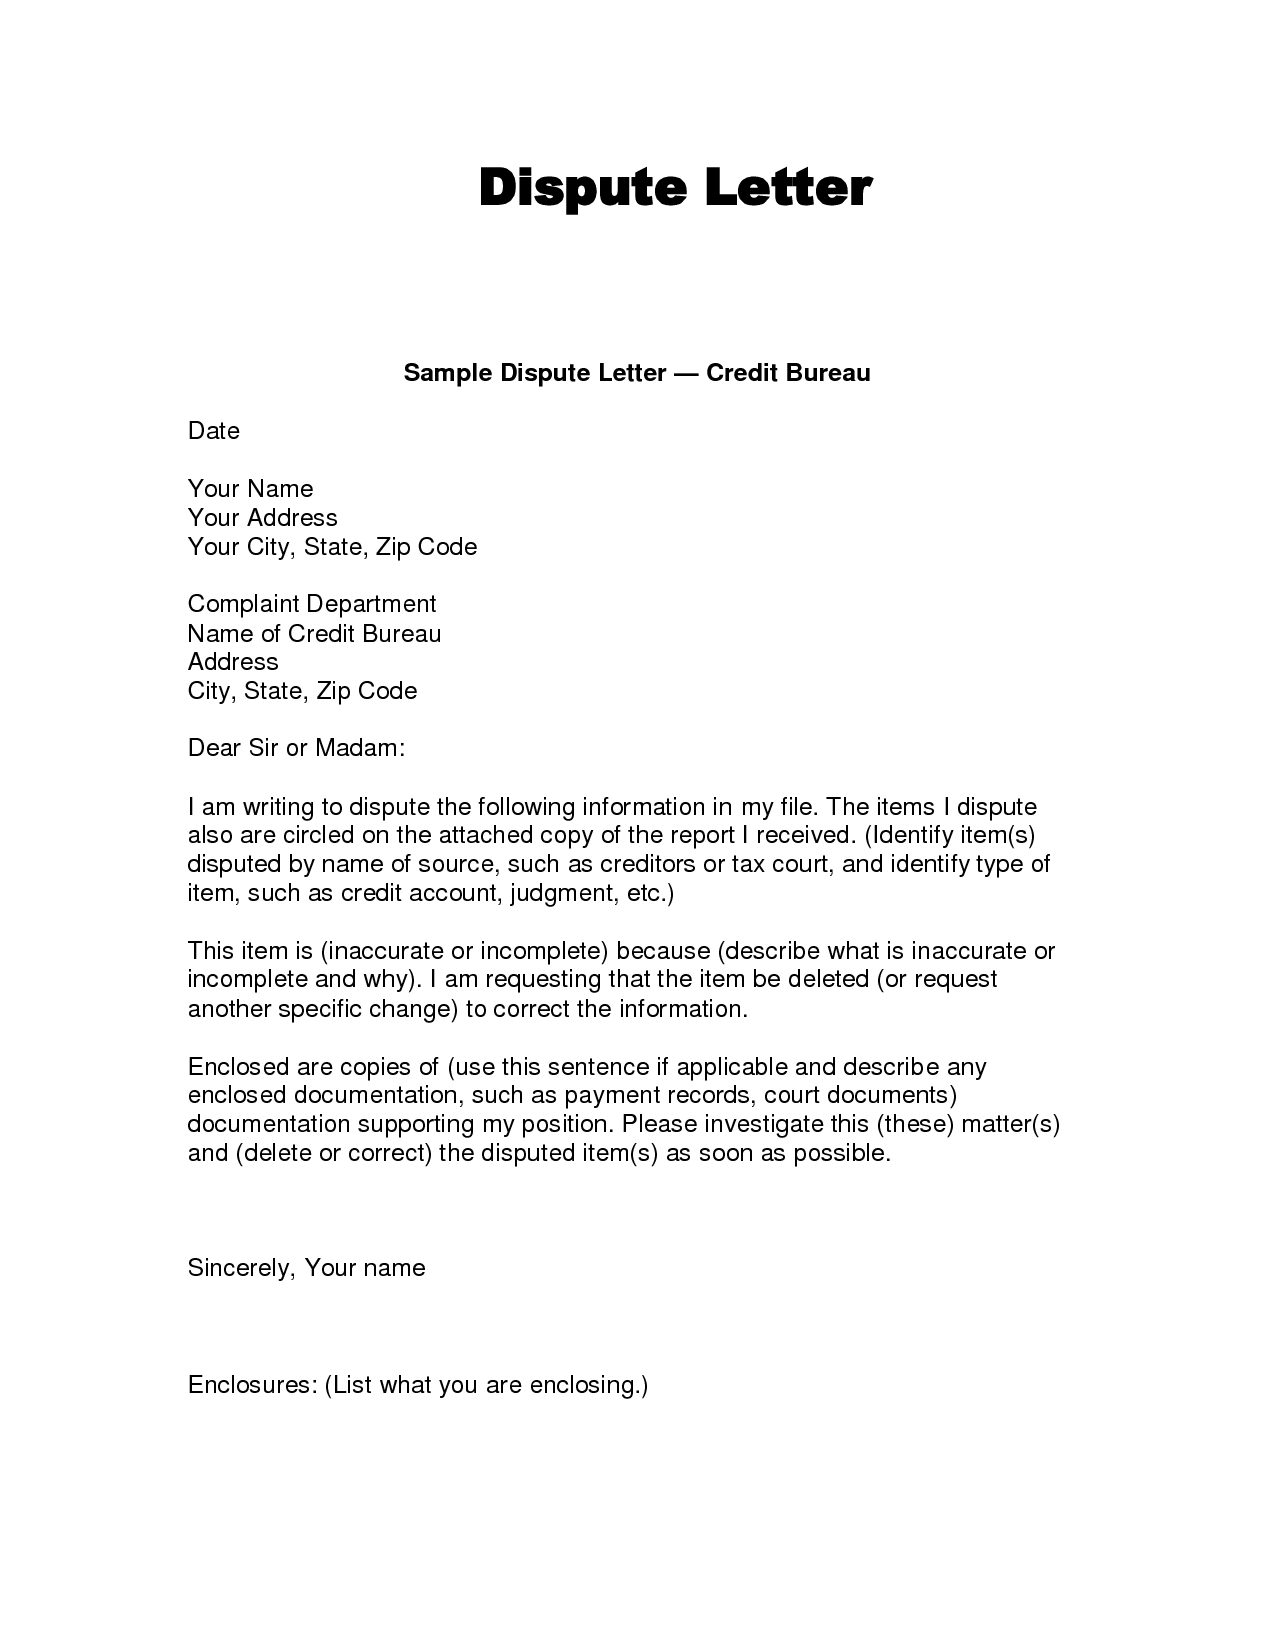 Credit Dispute Letter Template Free - Credit Dispute Letter Templates Acurnamedia